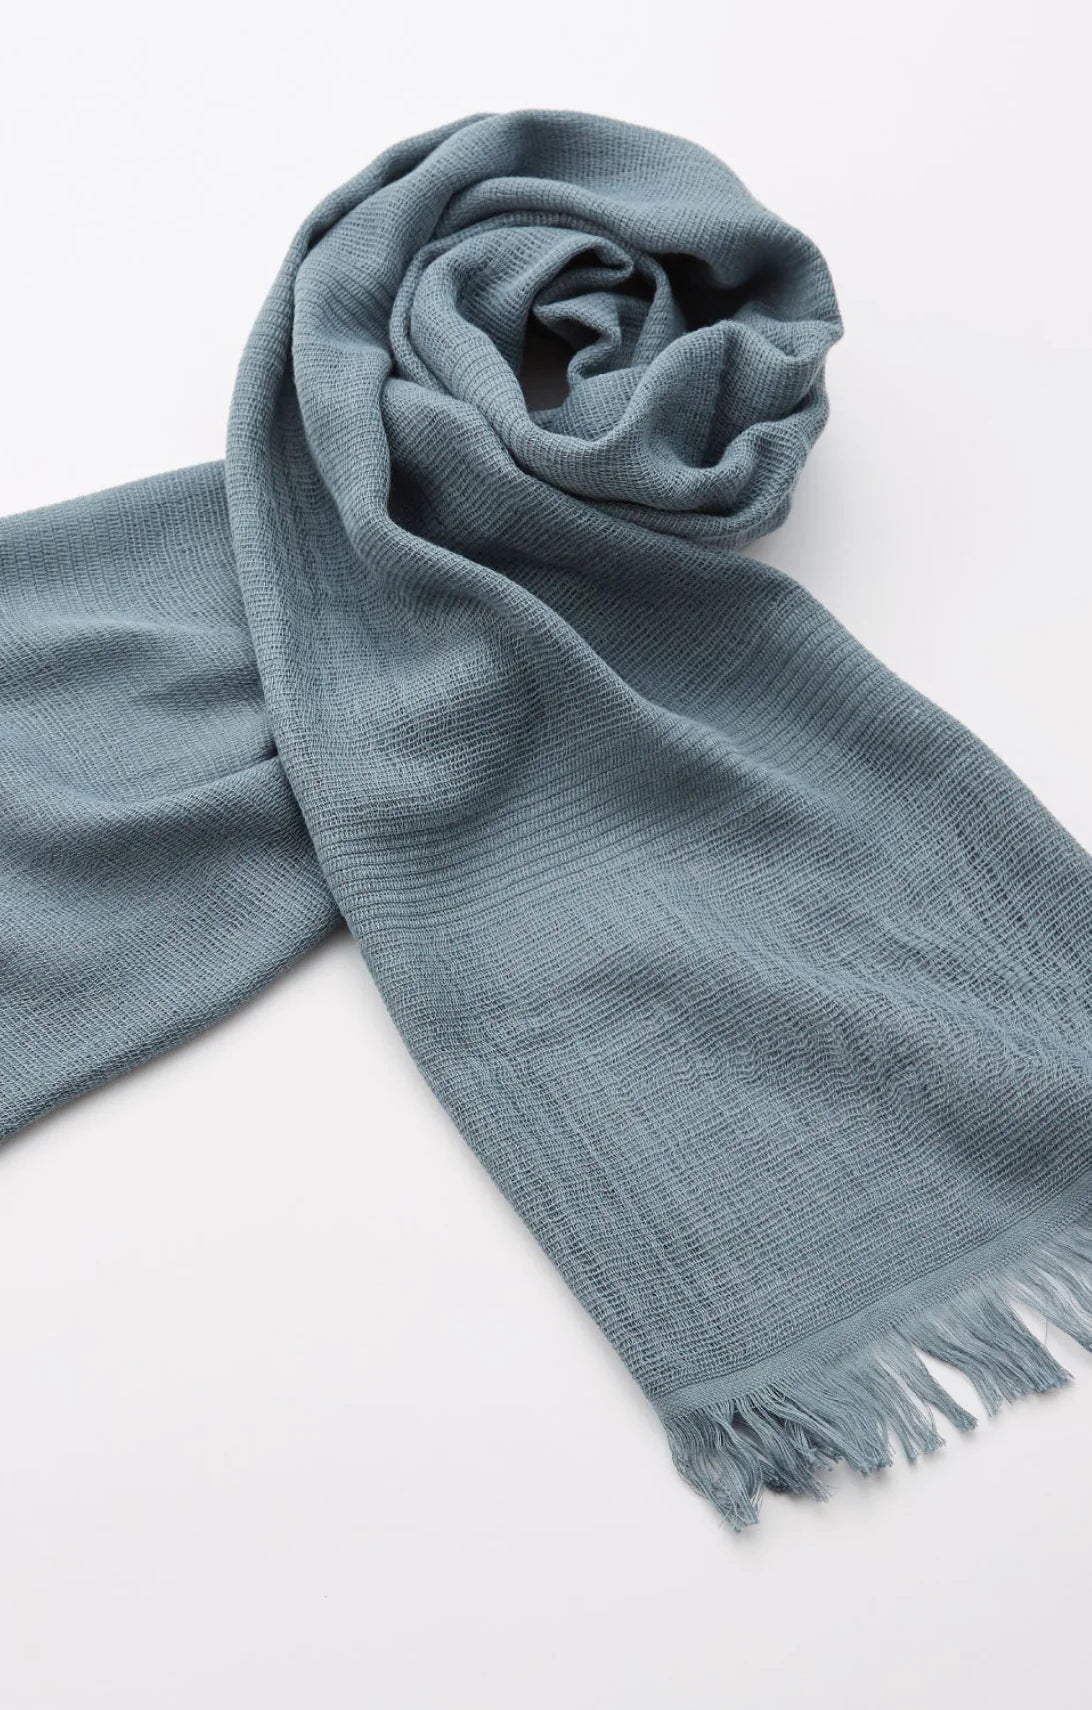 Tabbisocks Supima Organic Cotton Scarf in Steel-Blue, a mixture of gray and blue